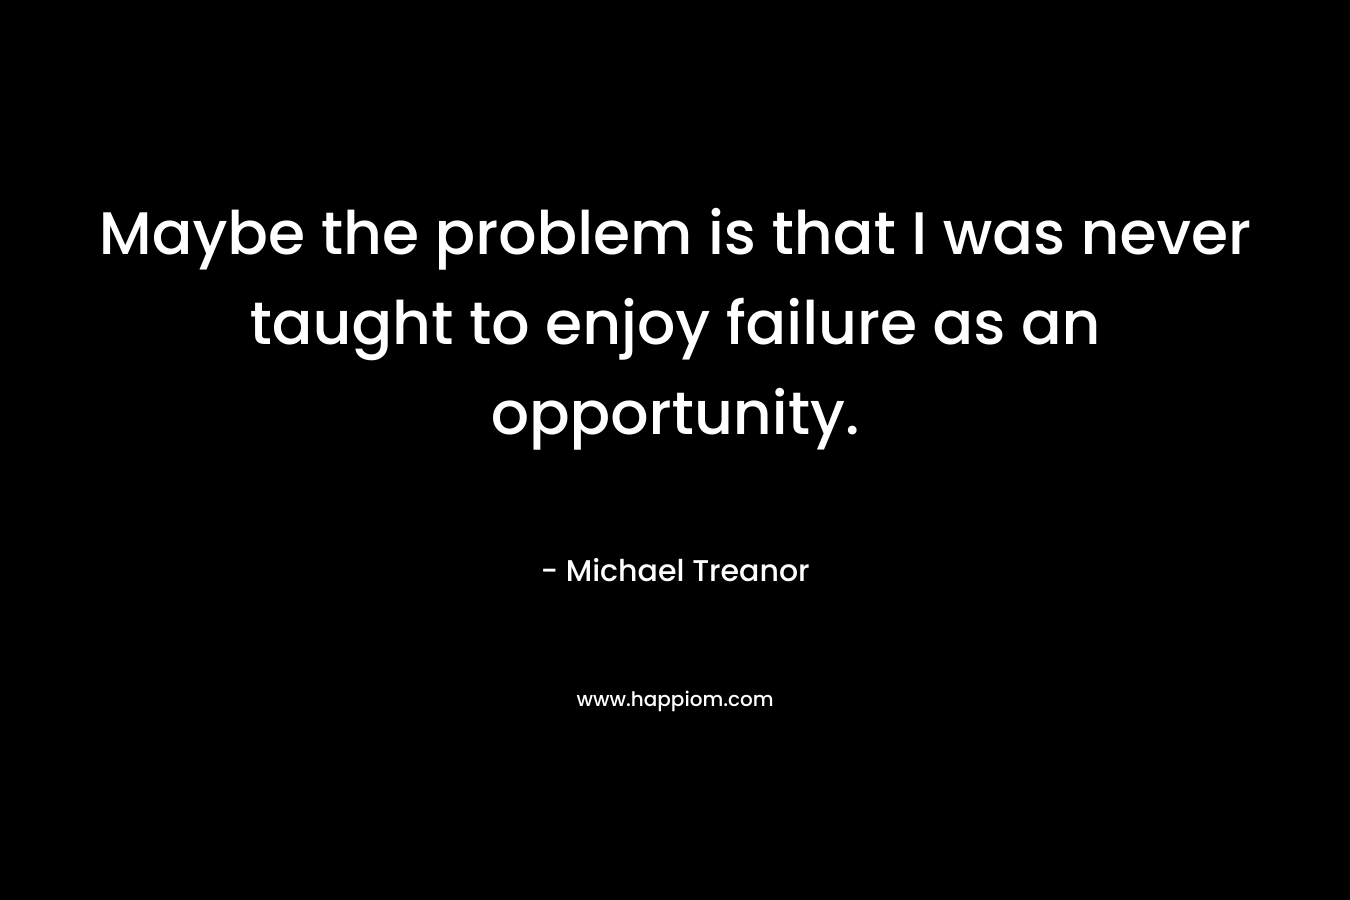 Maybe the problem is that I was never taught to enjoy failure as an opportunity.